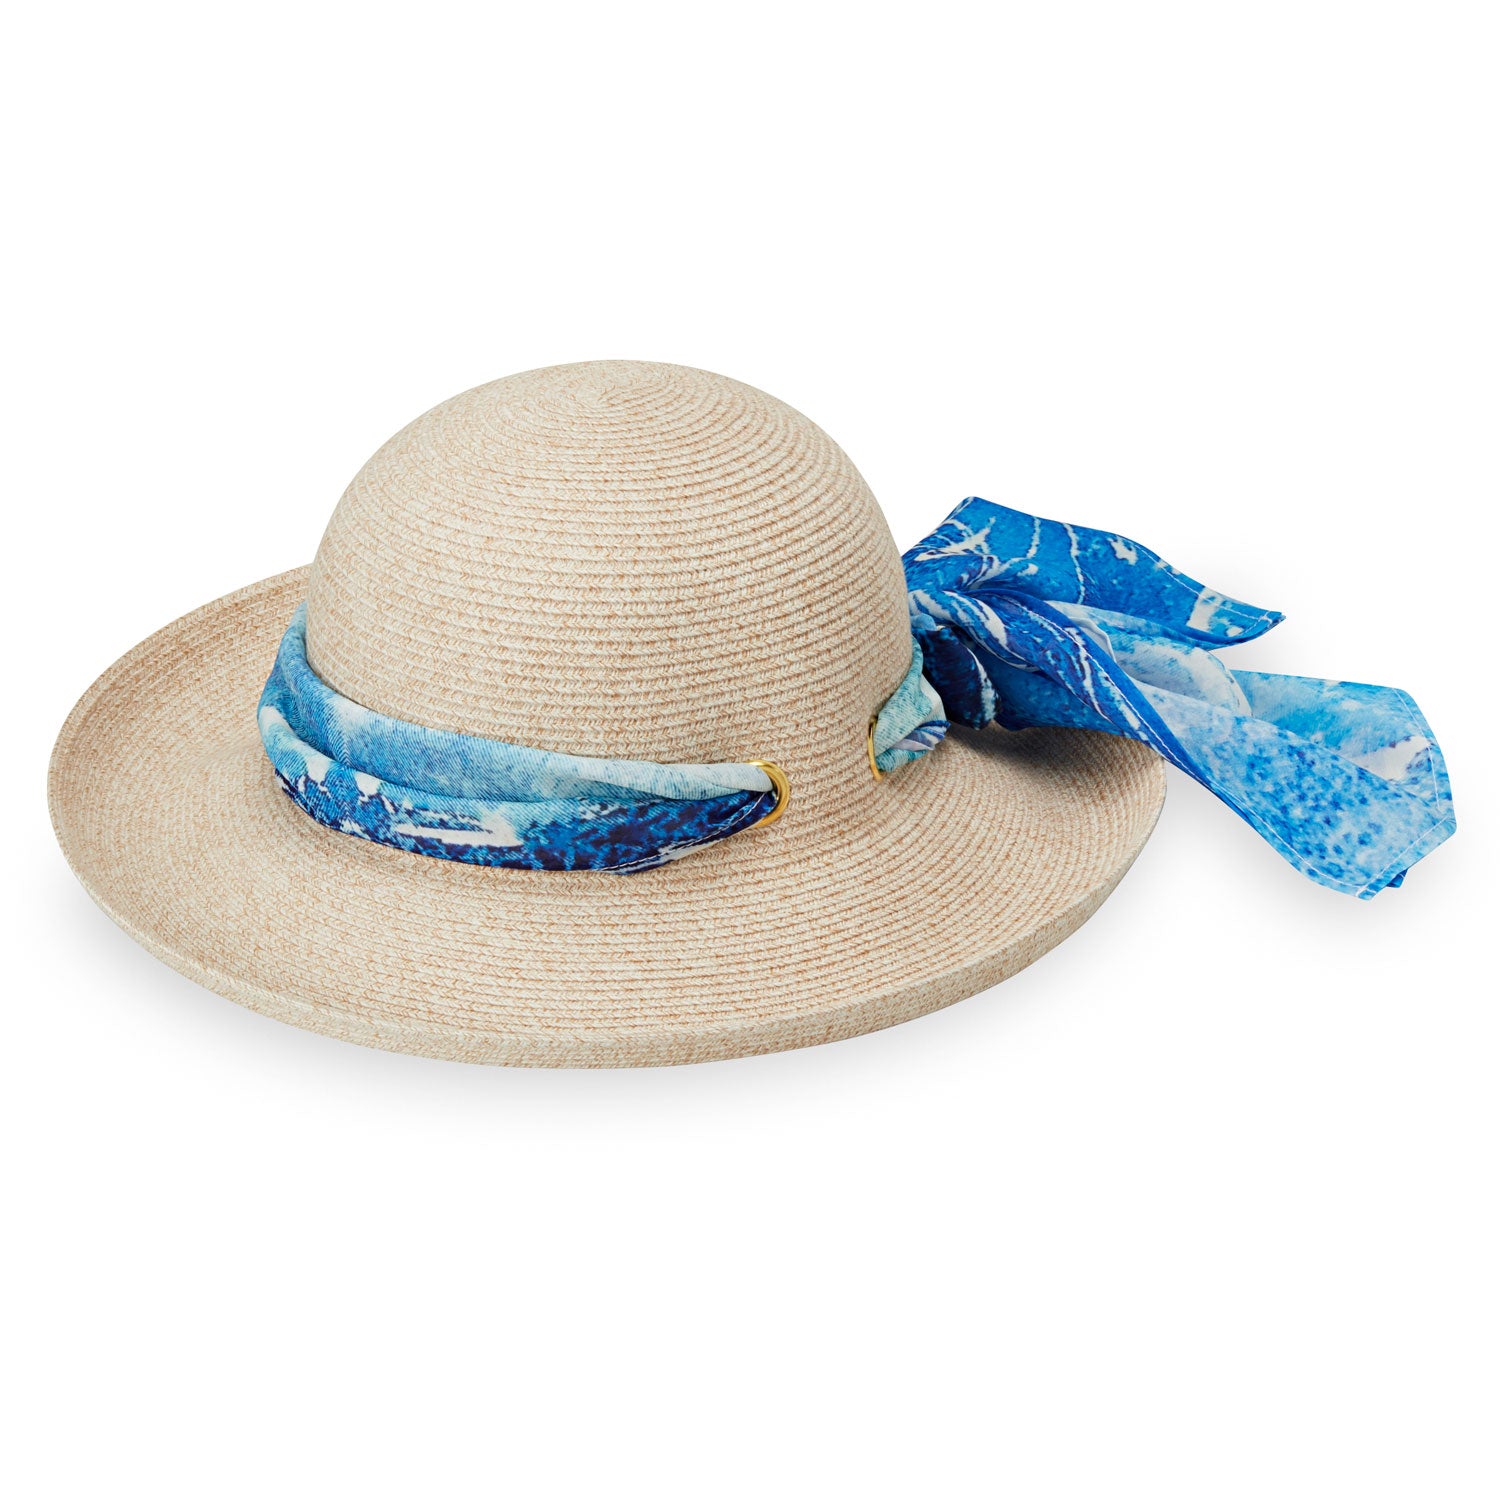 Featuring Women's Big Wide Brim Lady Jane UPF Sun Hat in Natural with Wave Scarf from Wallaroo